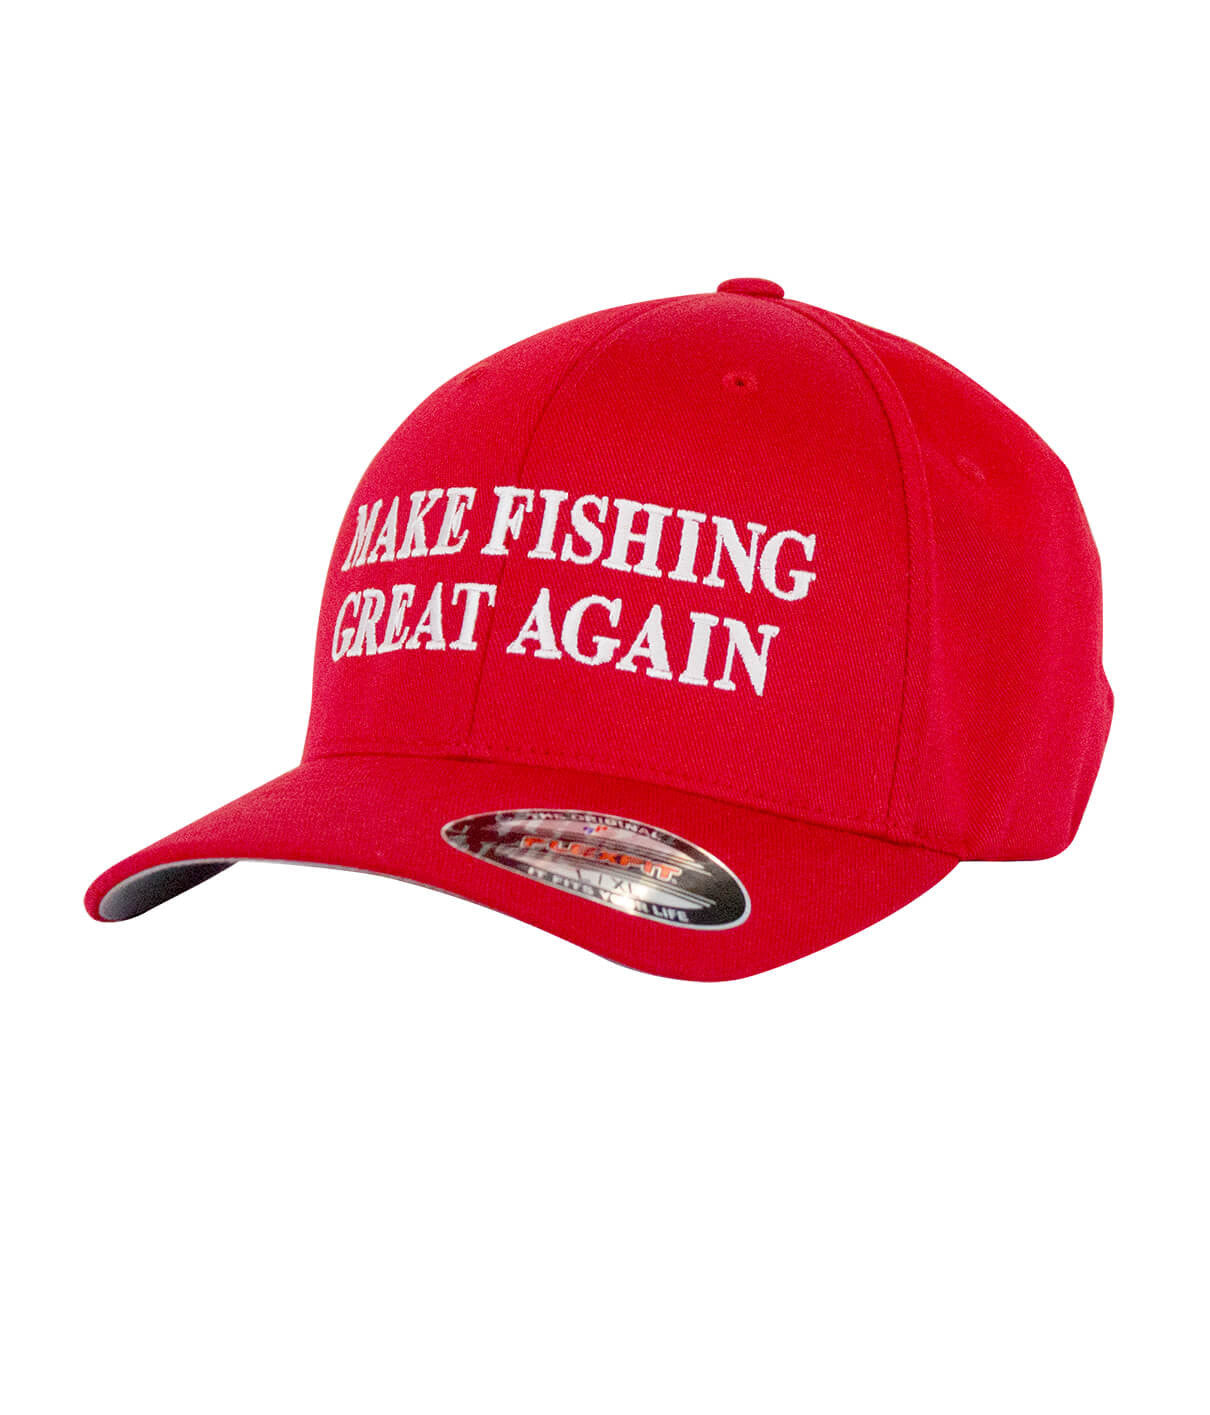 Red Make Fishing Great Again Classic Flexfit Hats | NICERIDE S/M